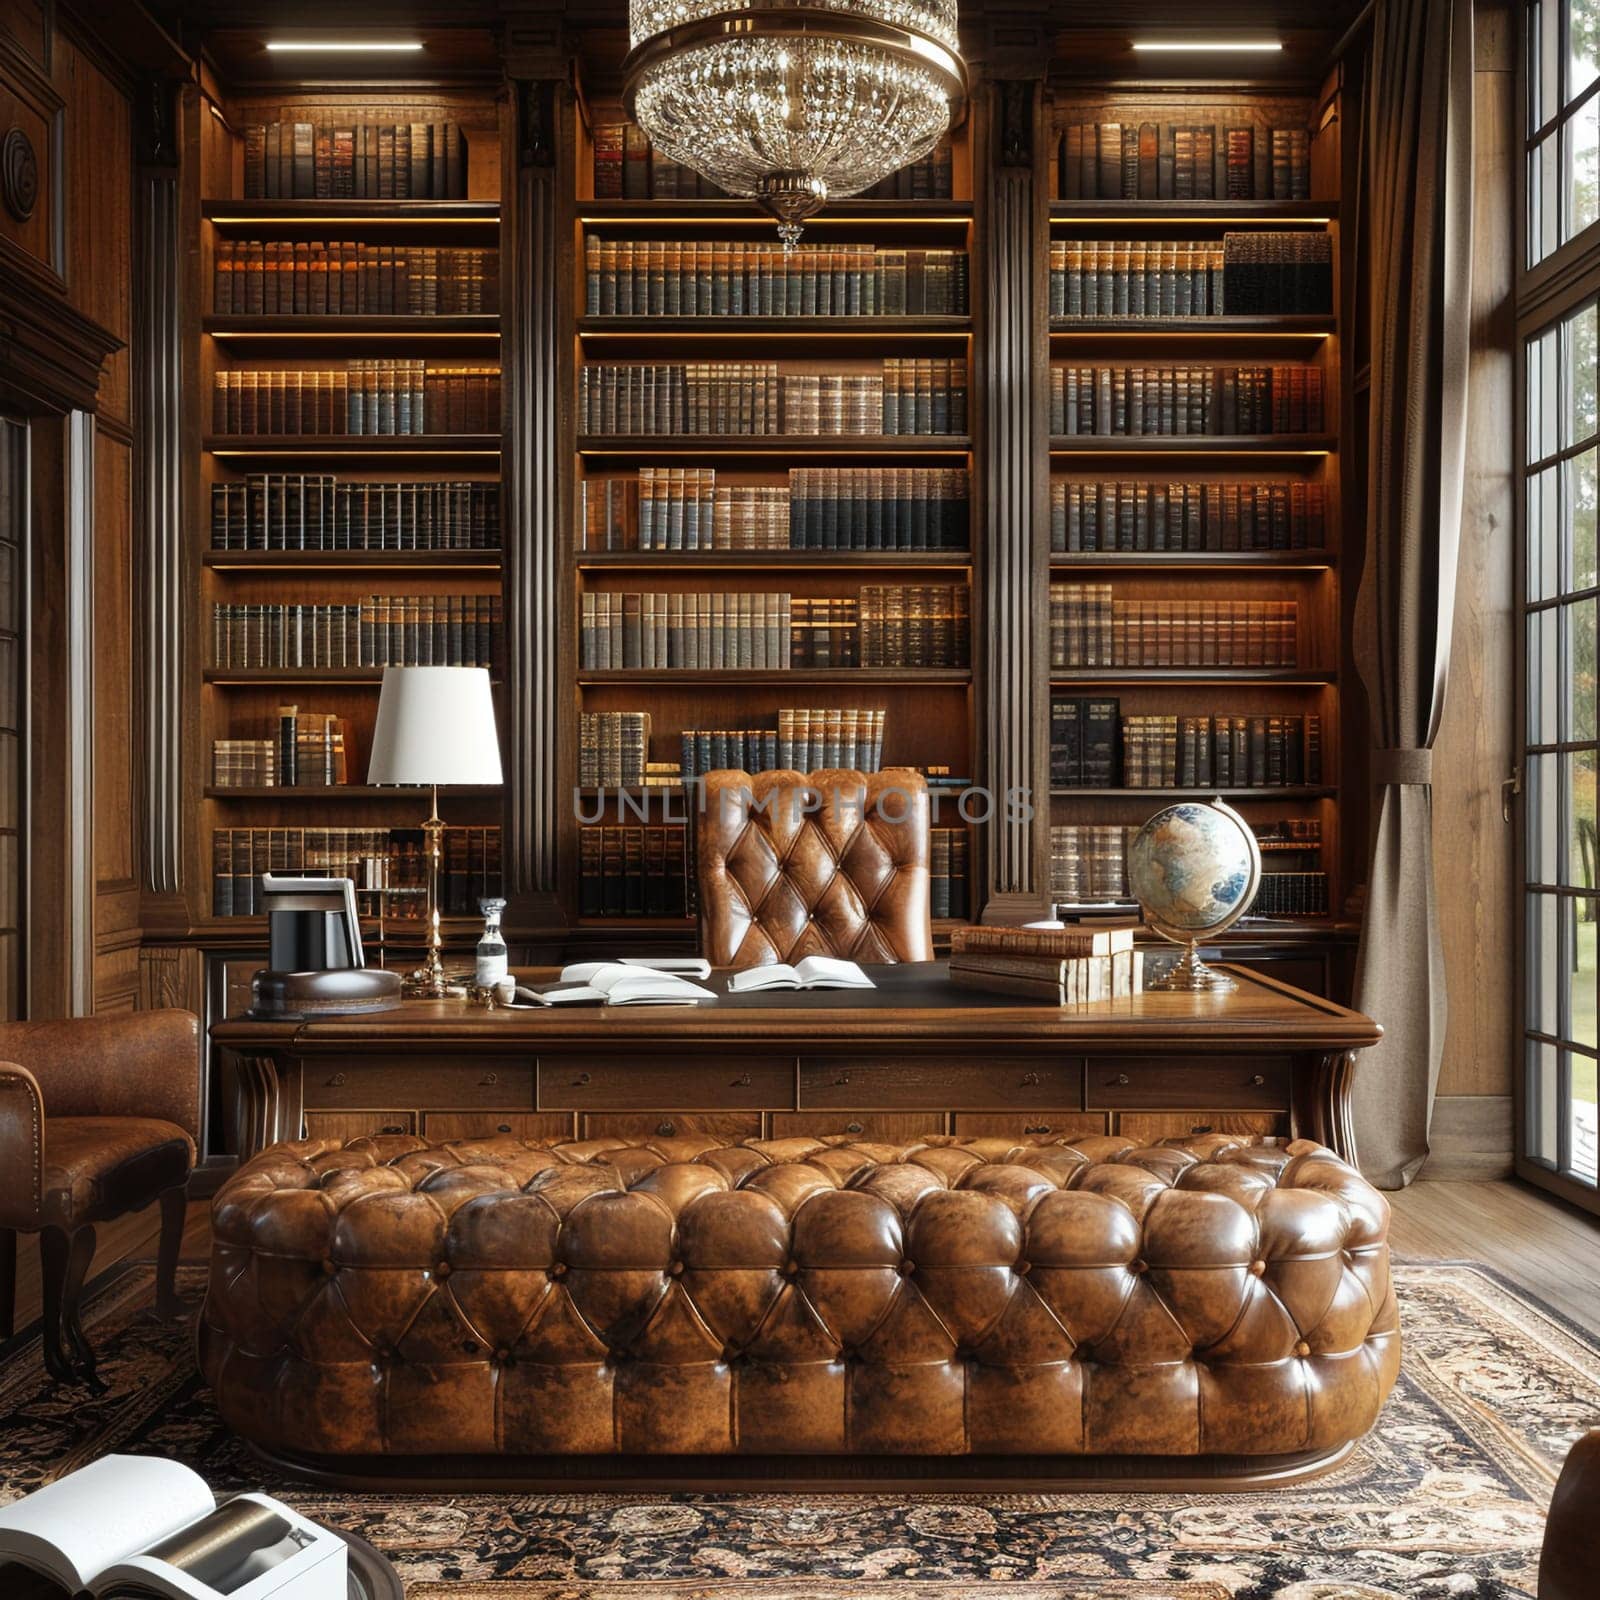 Vintage-inspired study with leather-bound books and a classic writing desk8K